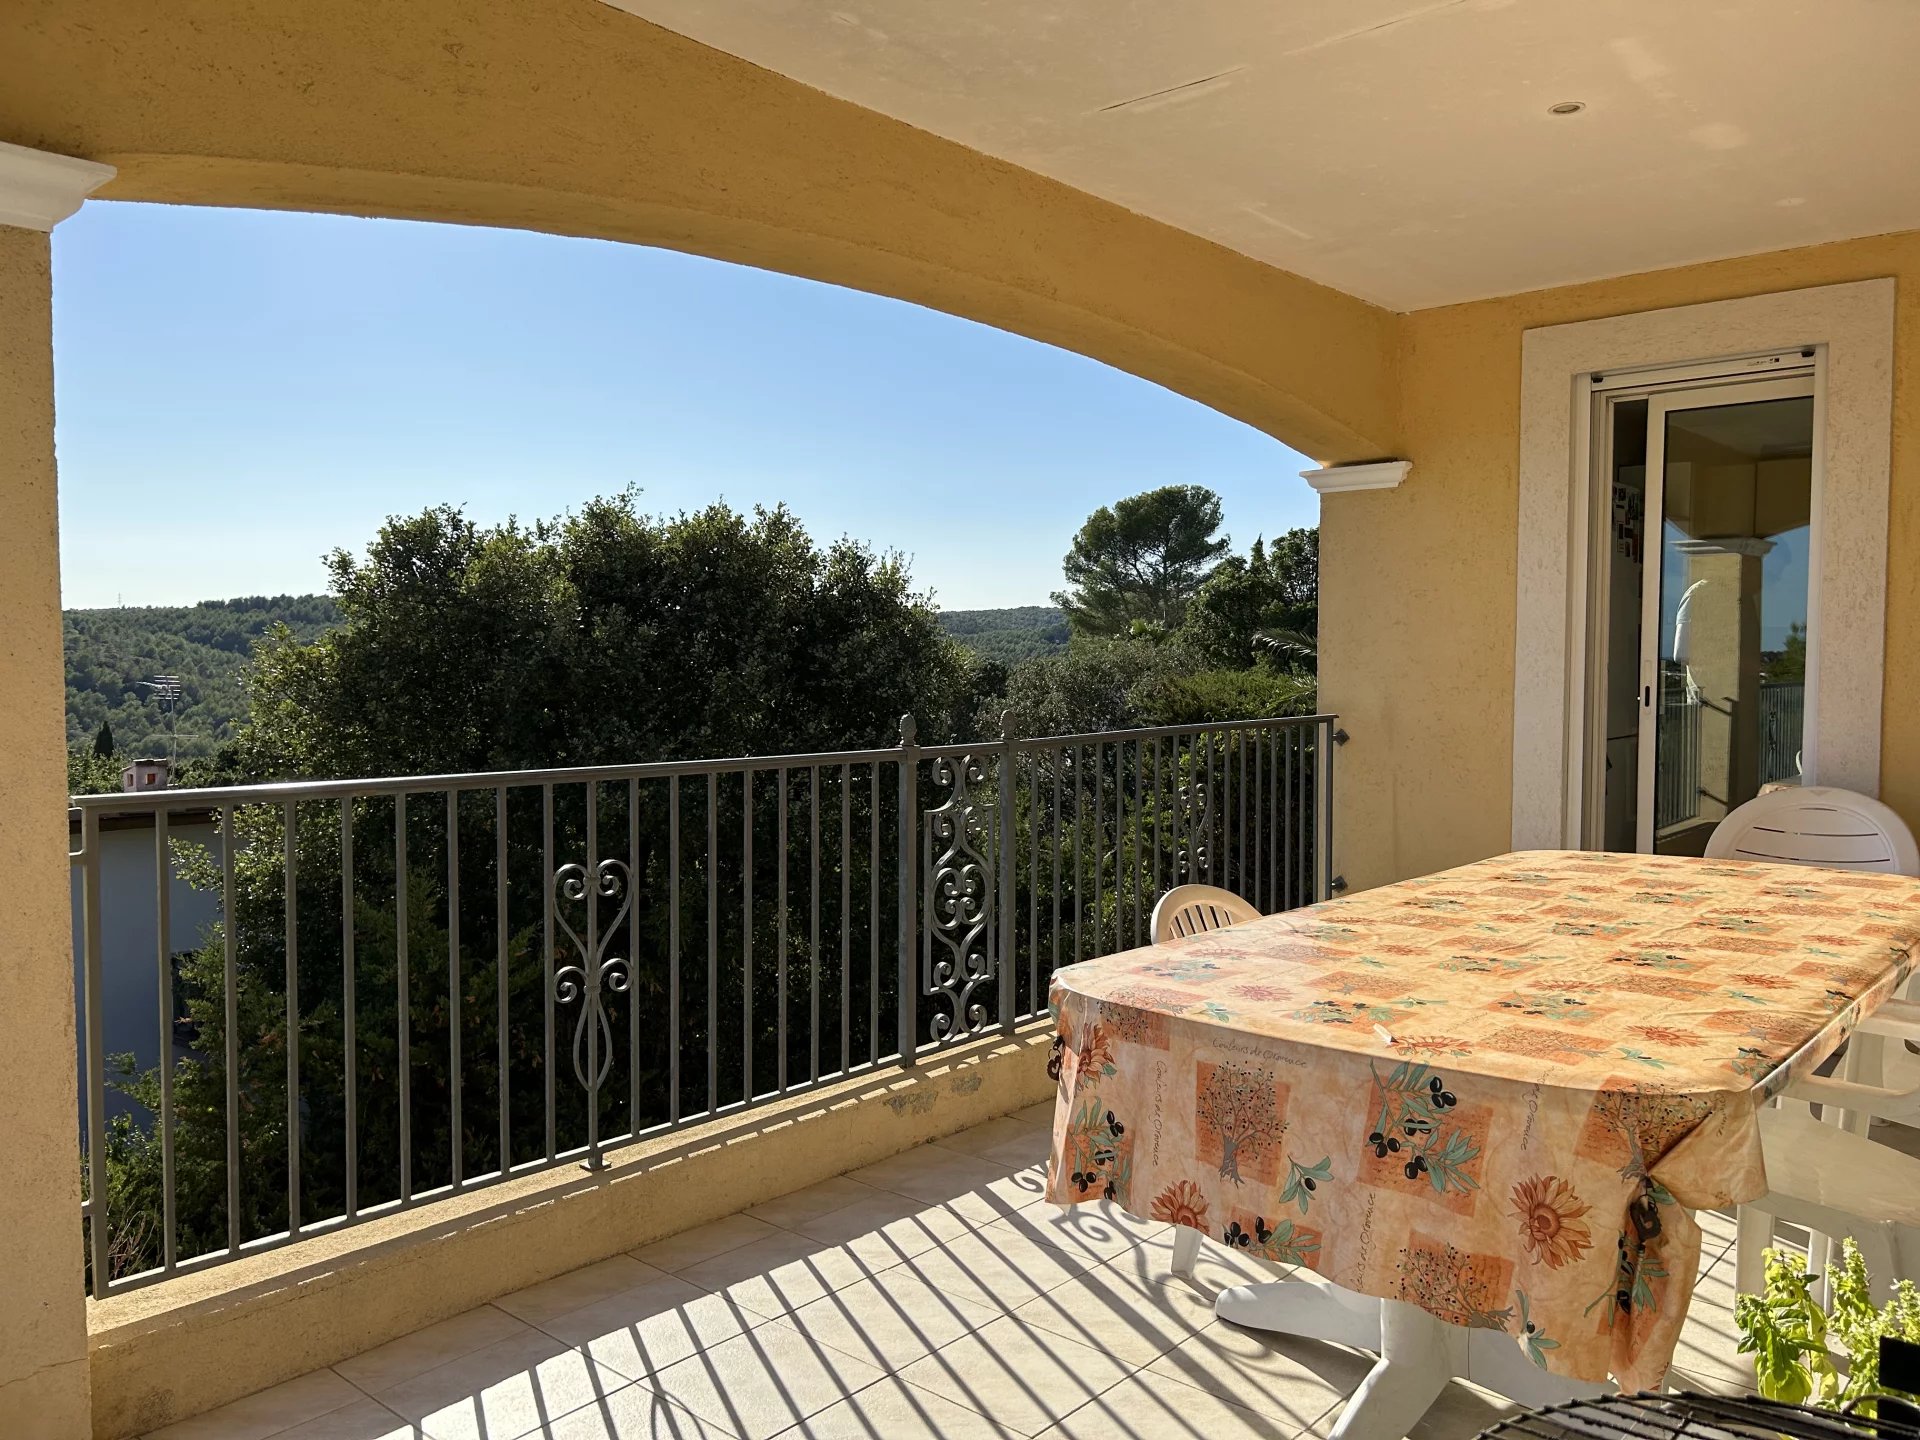 Biot: Very beautiful 4 bedroom villa with infinity pool 1000m2 of land